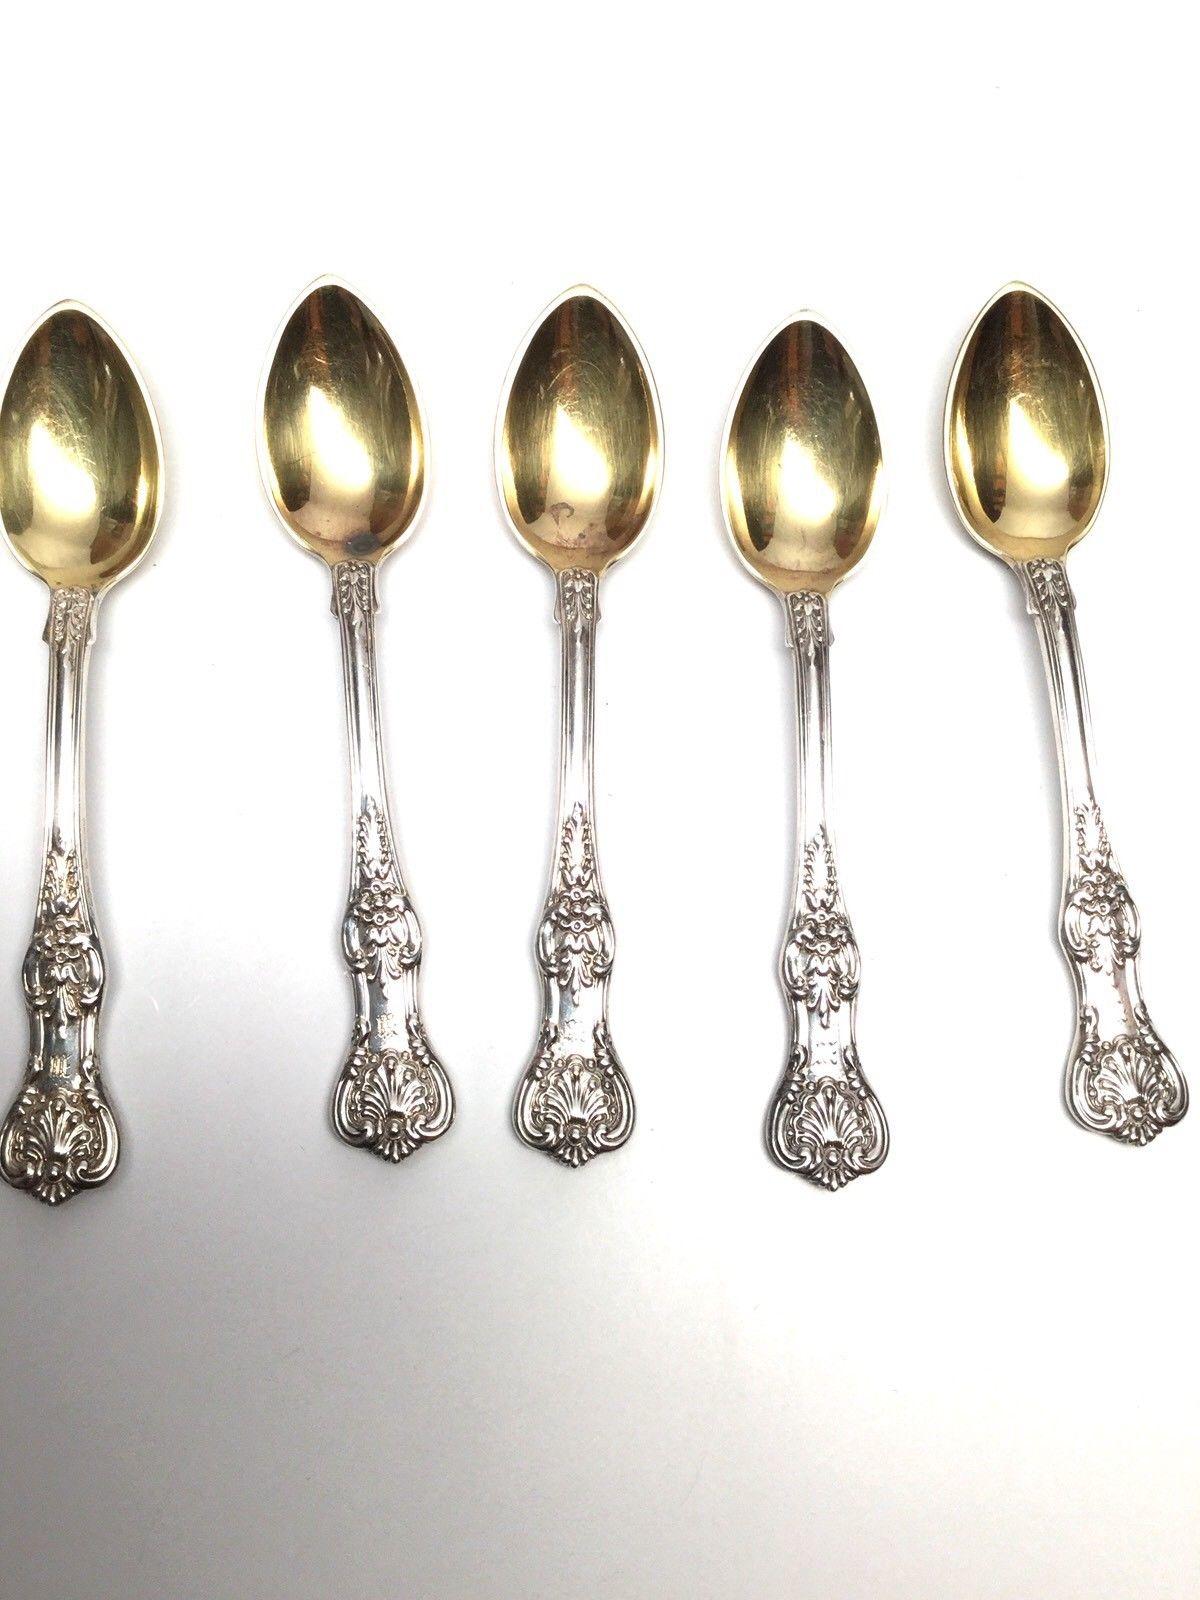 American Tiffany & Co English King Pattern 1885 Sterling Silver Set of 5 Demitasse Spoons